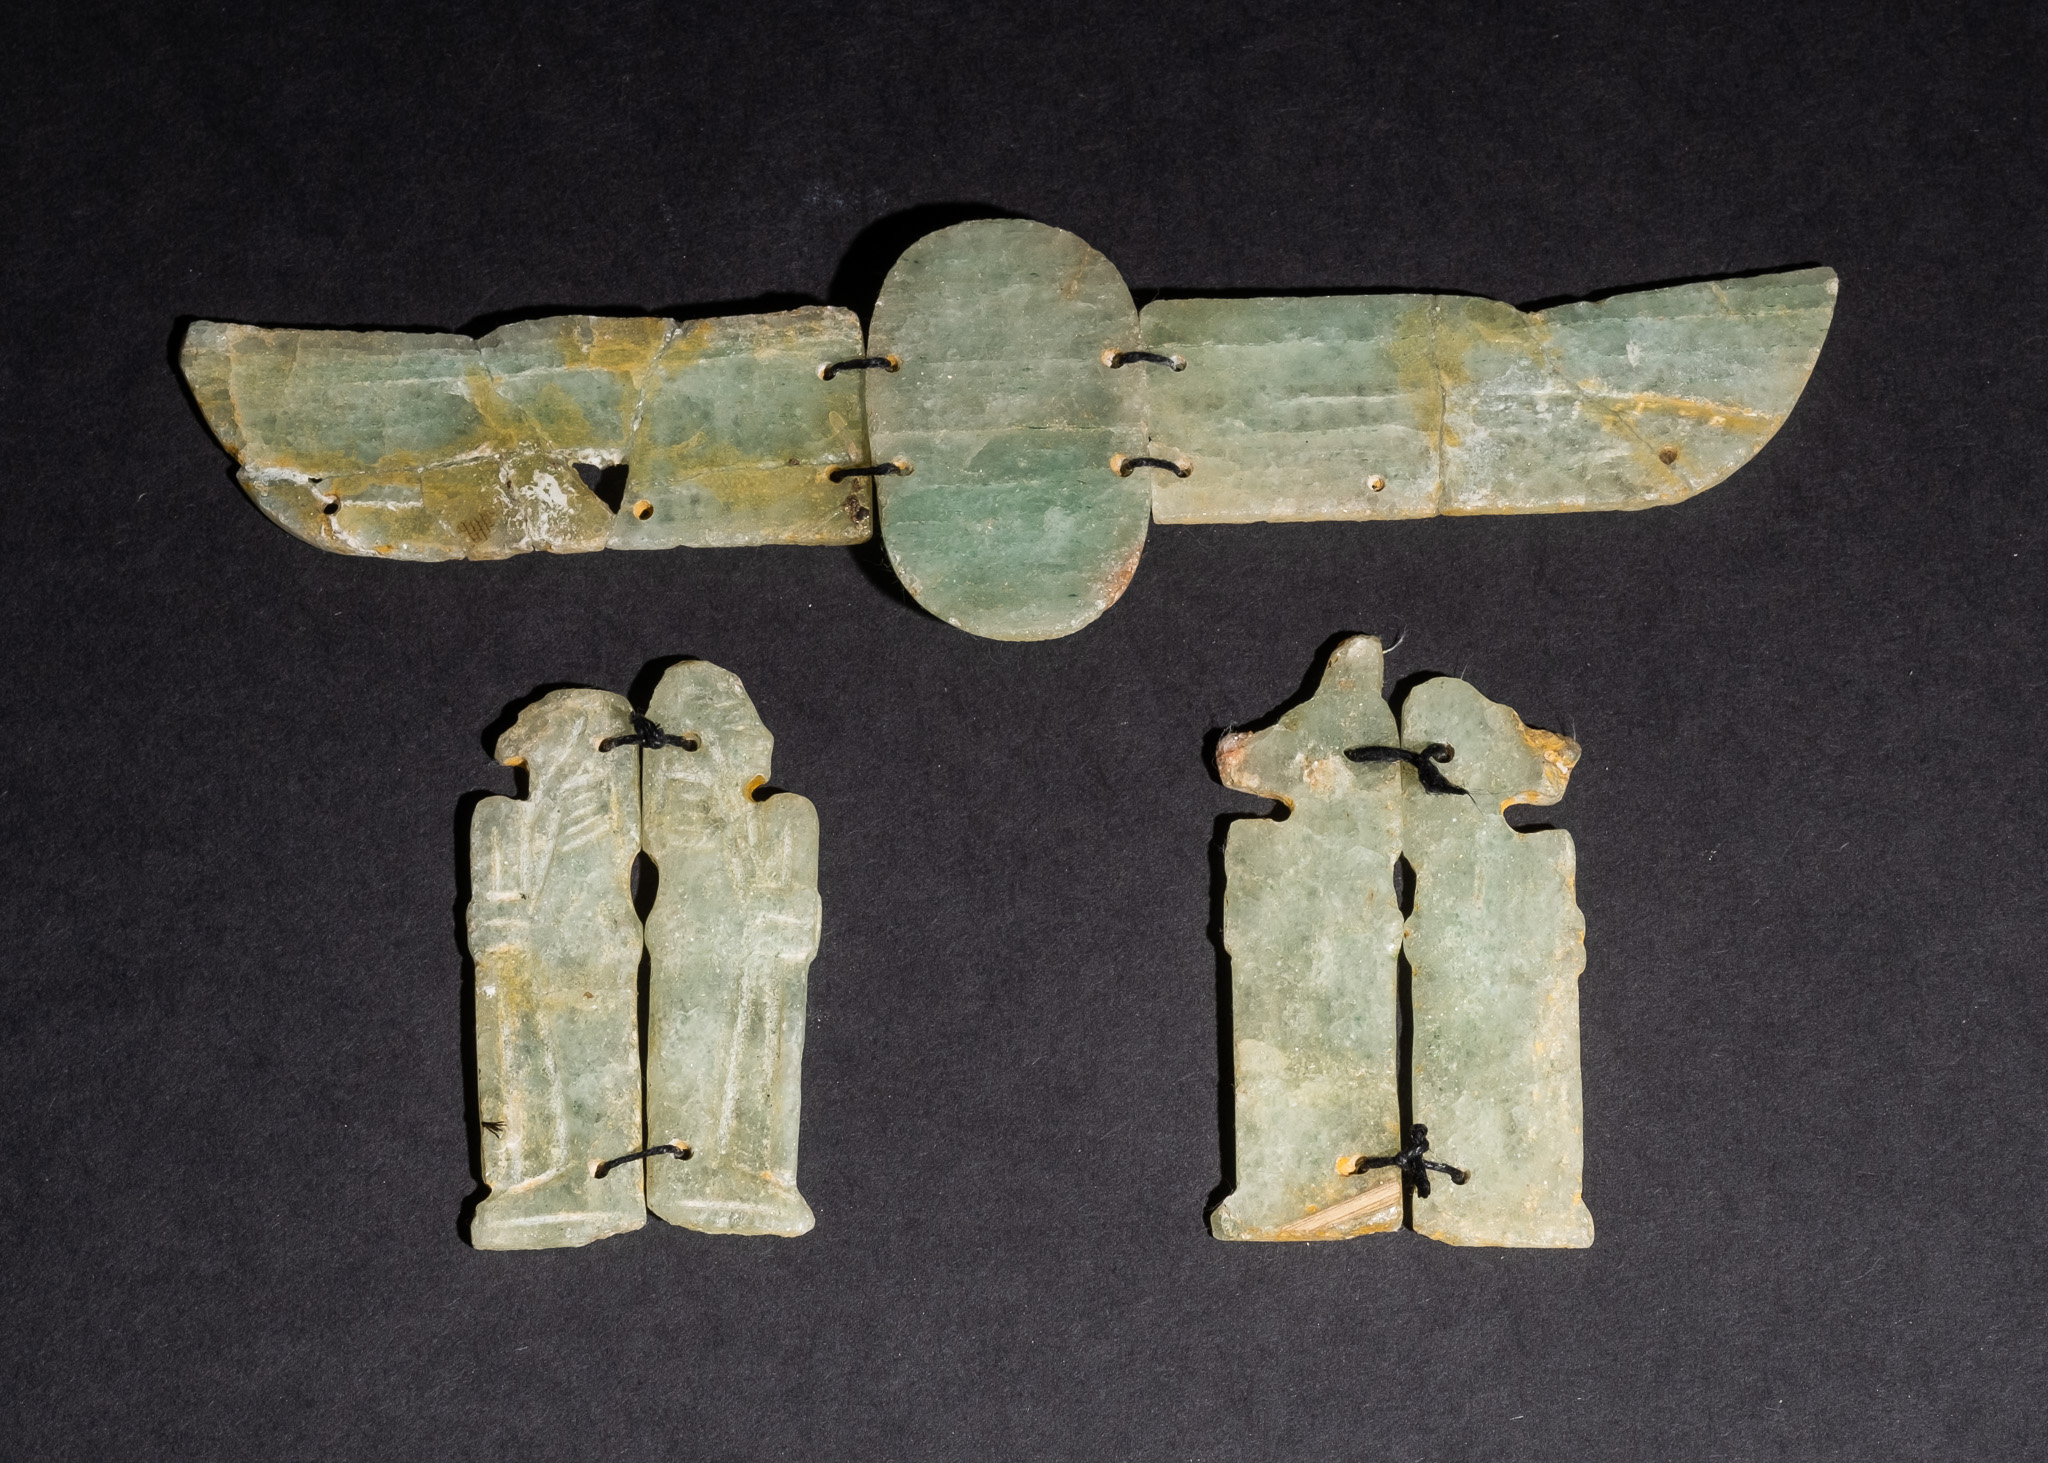 A HIGHLY RARE EGYPTIAN AGATE ENGRAVED WINGED SCARAB & BASTET AND PHARAOH AMULETS - Image 3 of 3